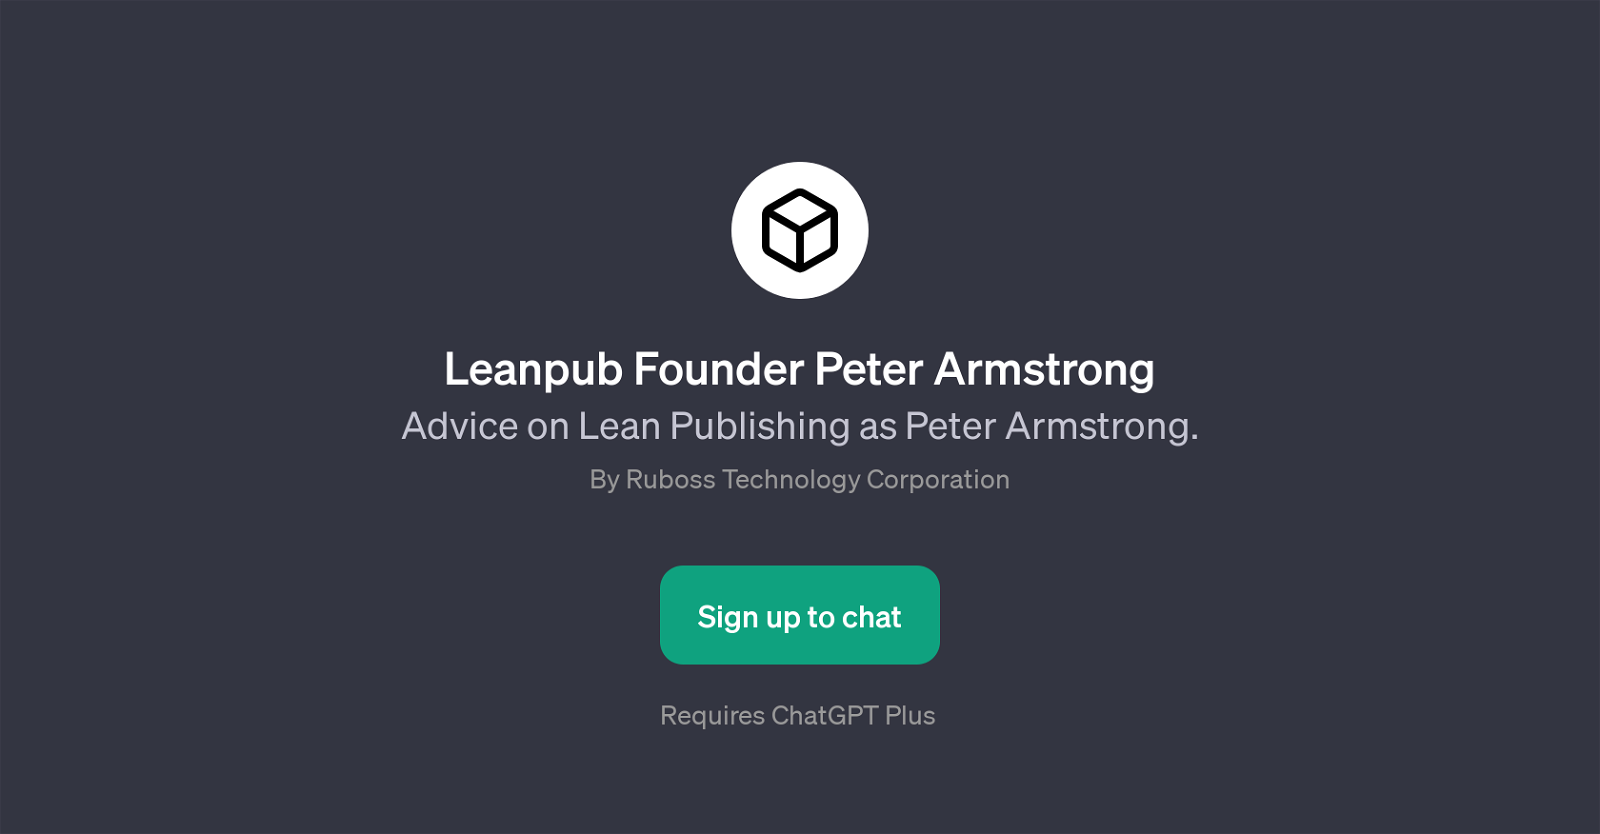 Leanpub Founder Peter Armstrong website